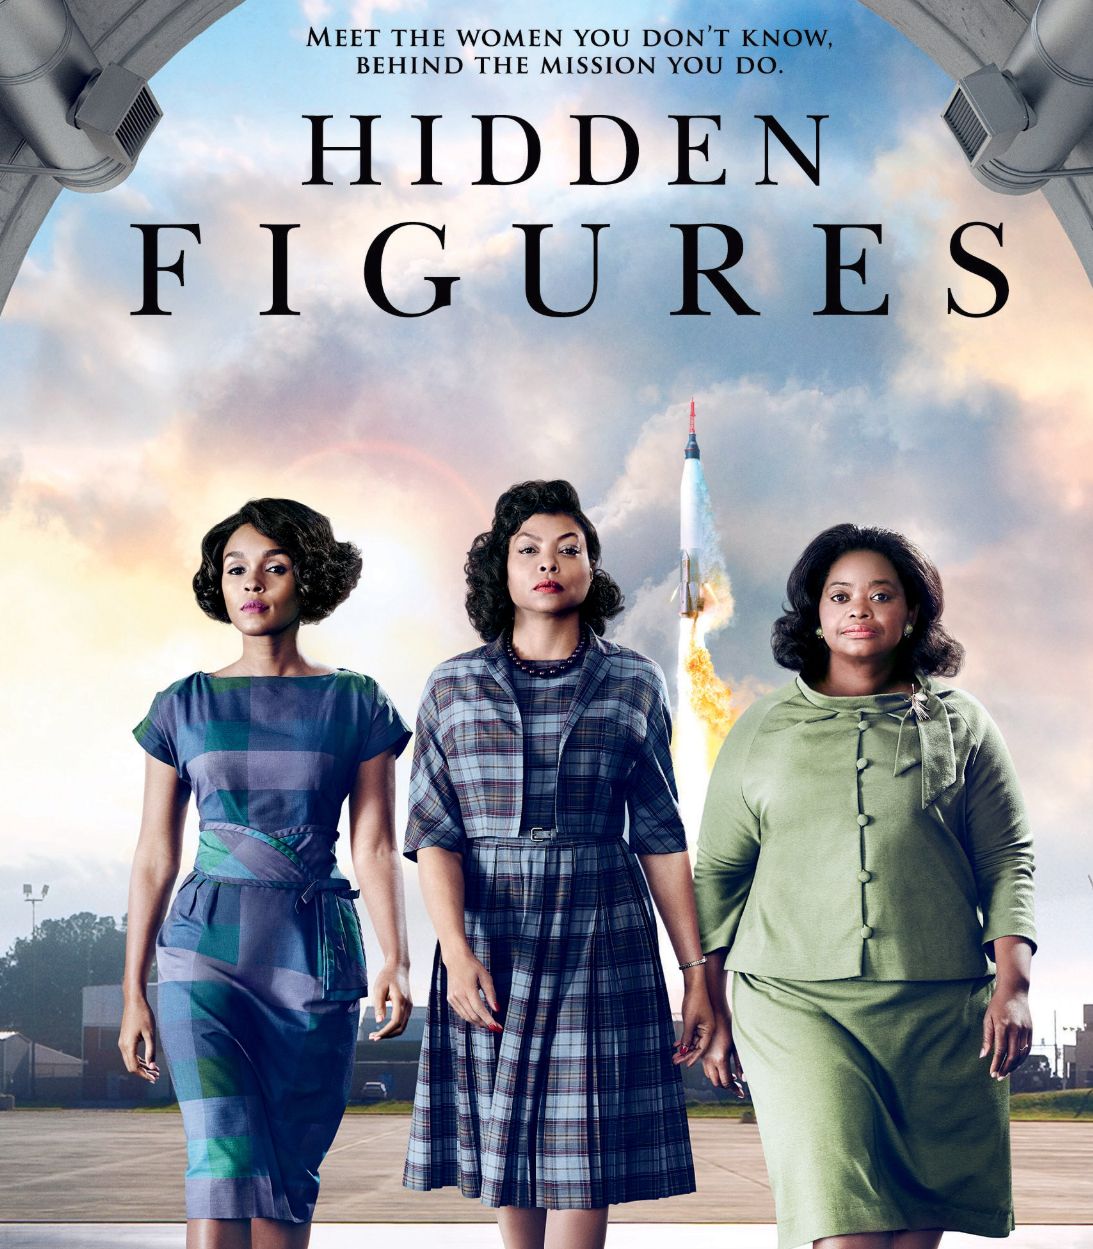 Janelle Monae, Taraji P. Henson and Octavia Spencer walk with a rocket behind them on the Hidden Figures Poster